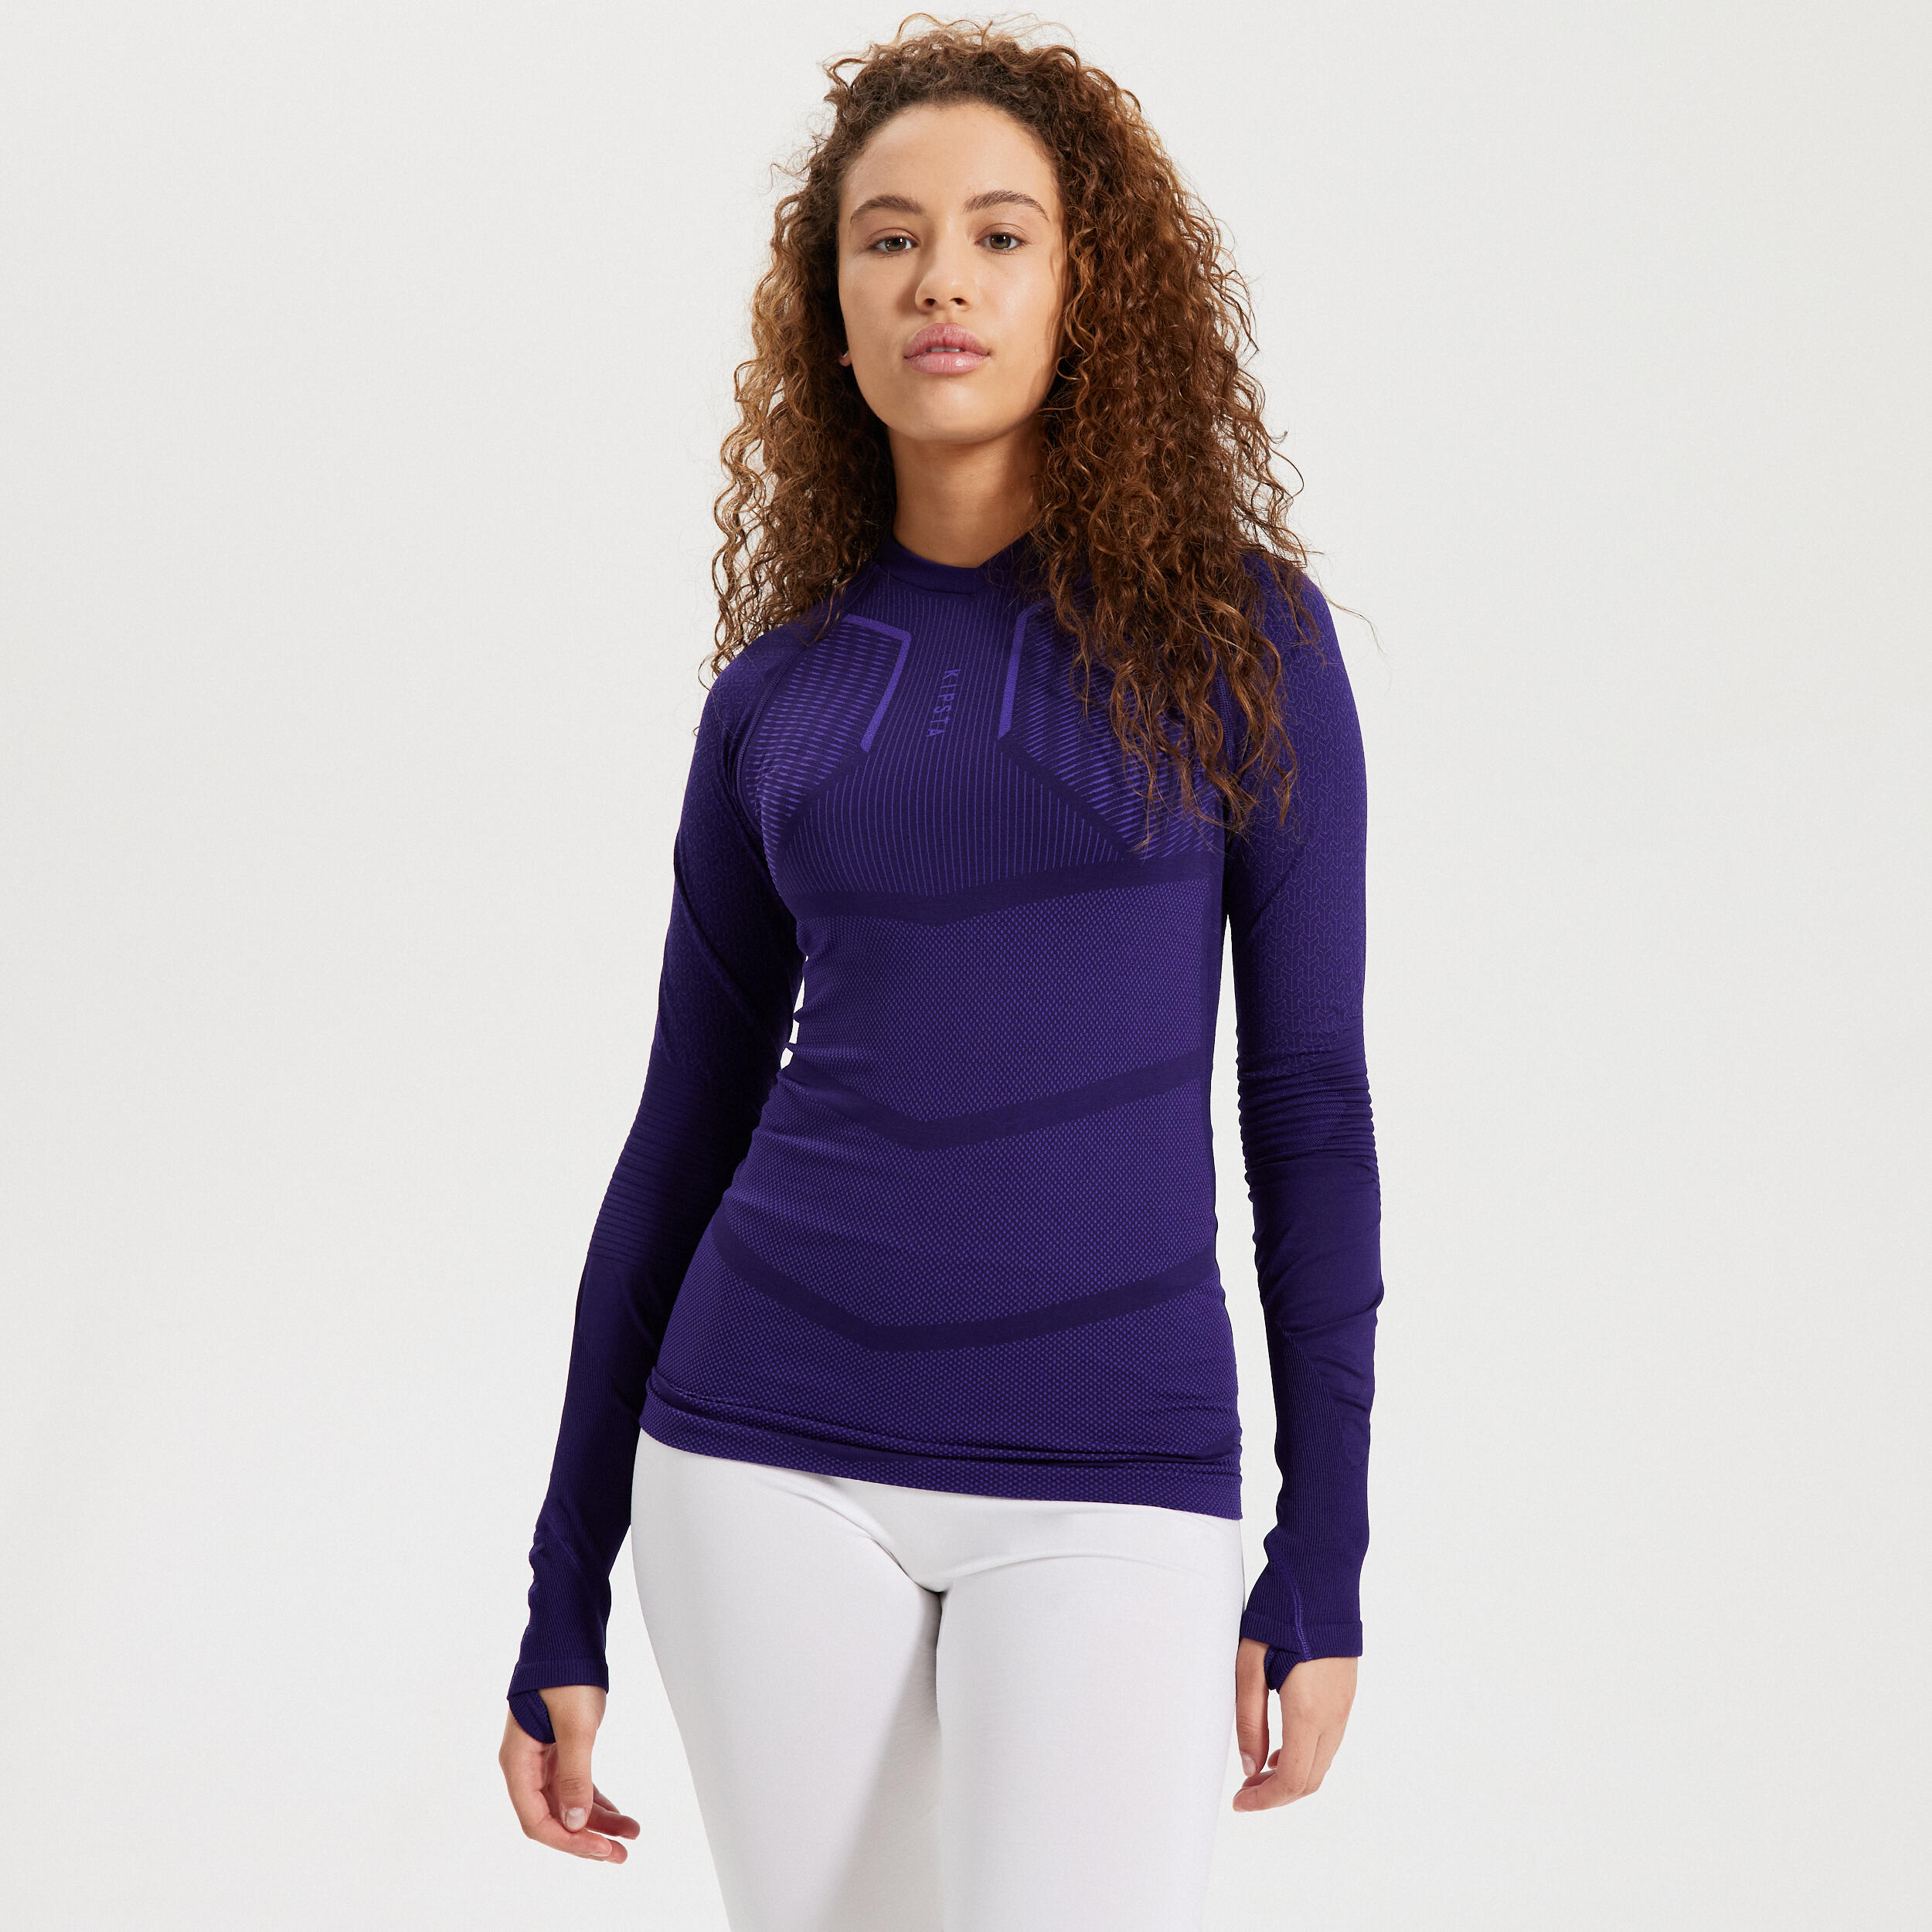 Adult Long-Sleeved Thermal Base Layer Top Keepdry 500 - Purple 4/15